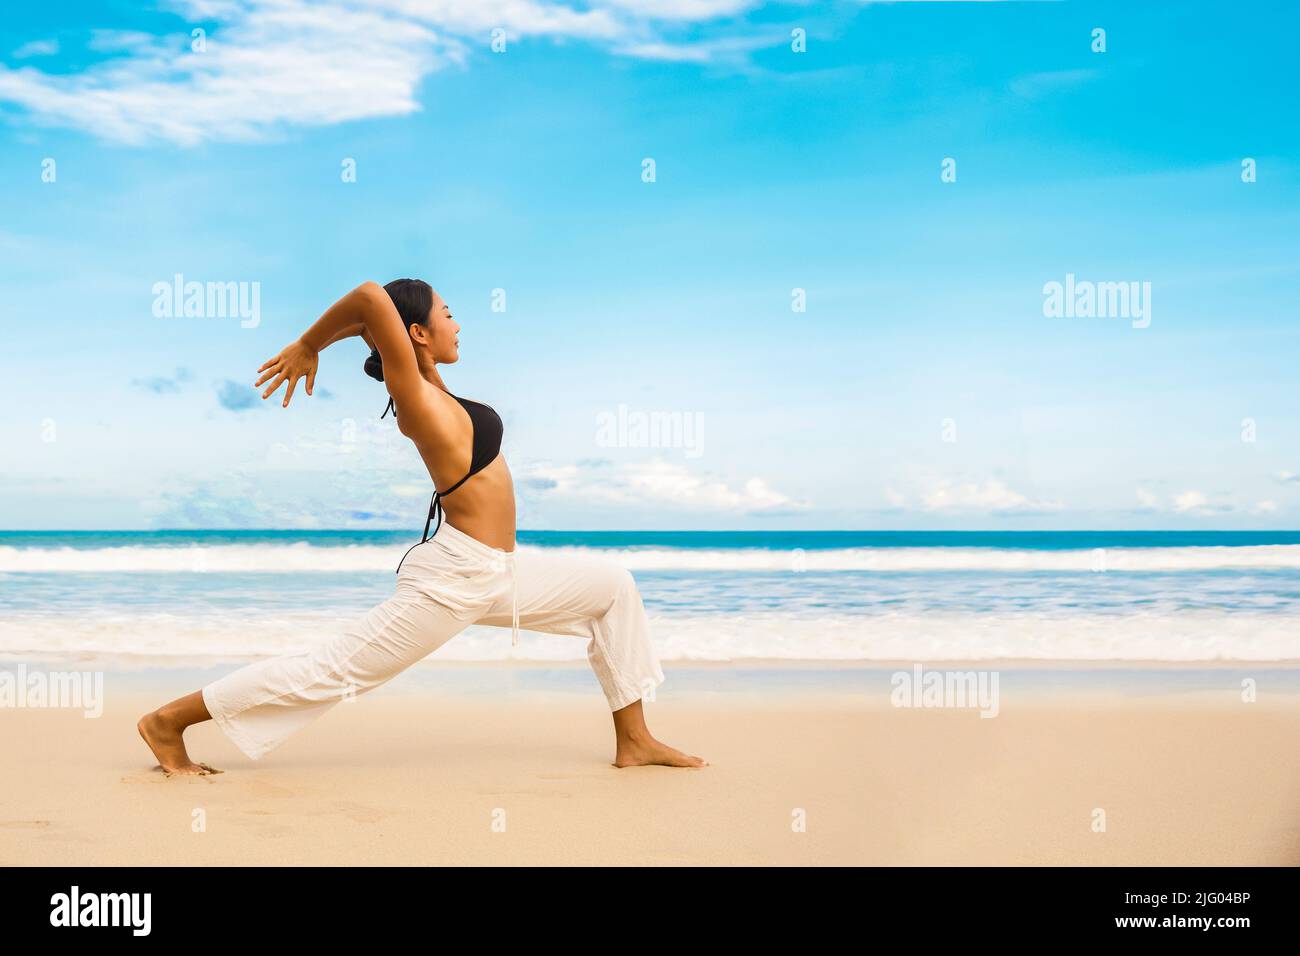 woman practicing yoga at seashore of tropic beach,Sports lady standing at the beach make yoga exercises Stock Photo